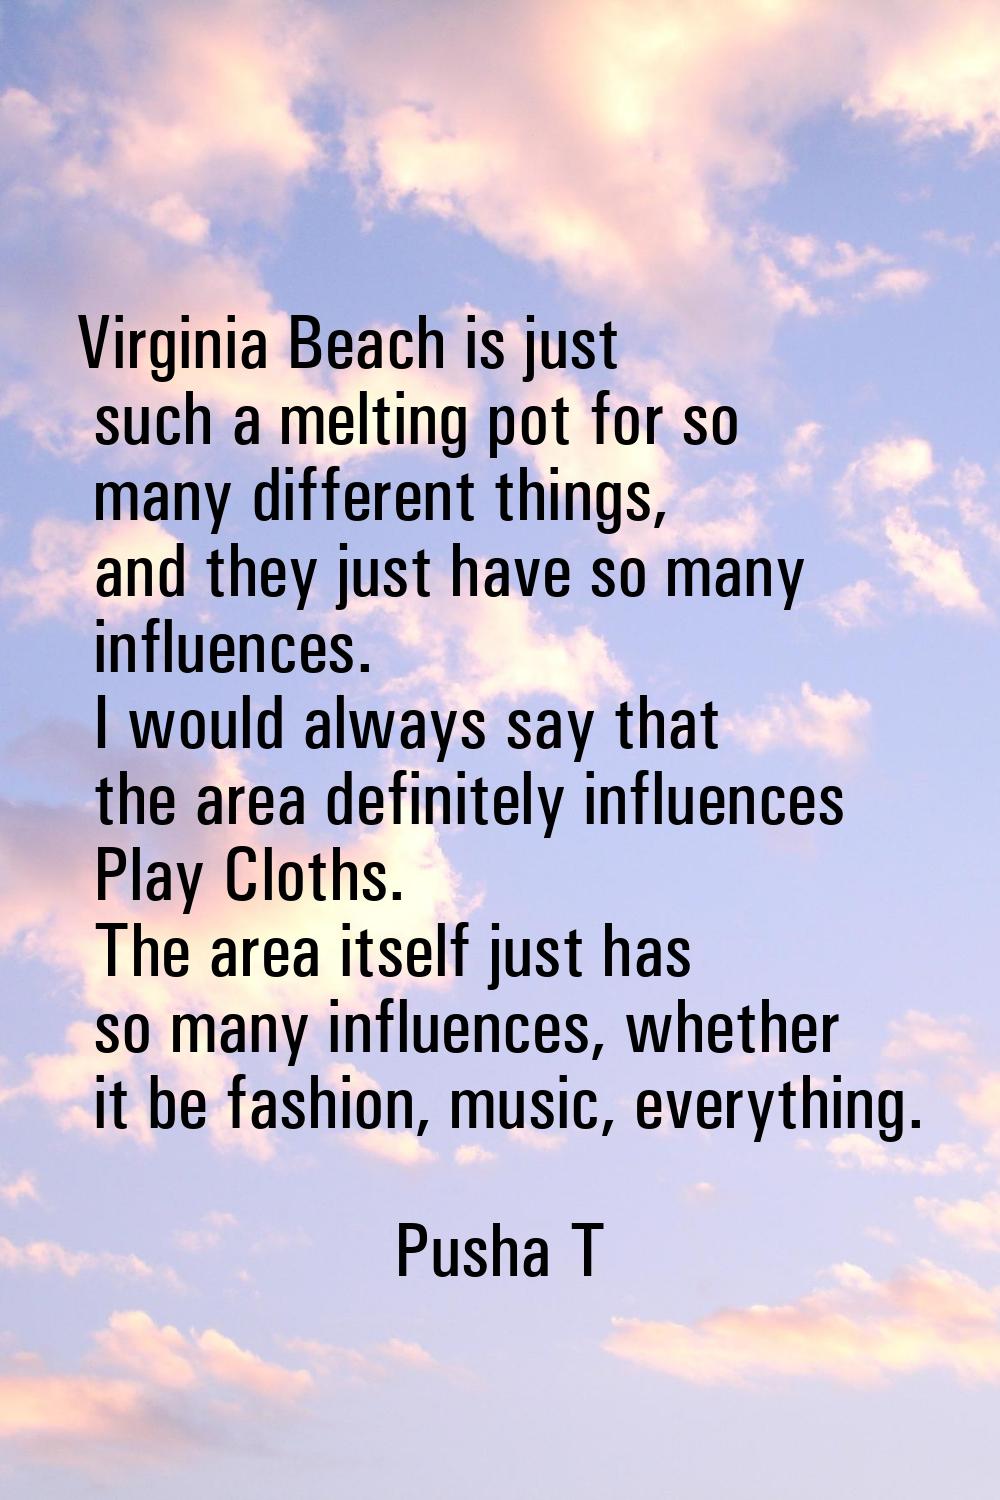 Virginia Beach is just such a melting pot for so many different things, and they just have so many 